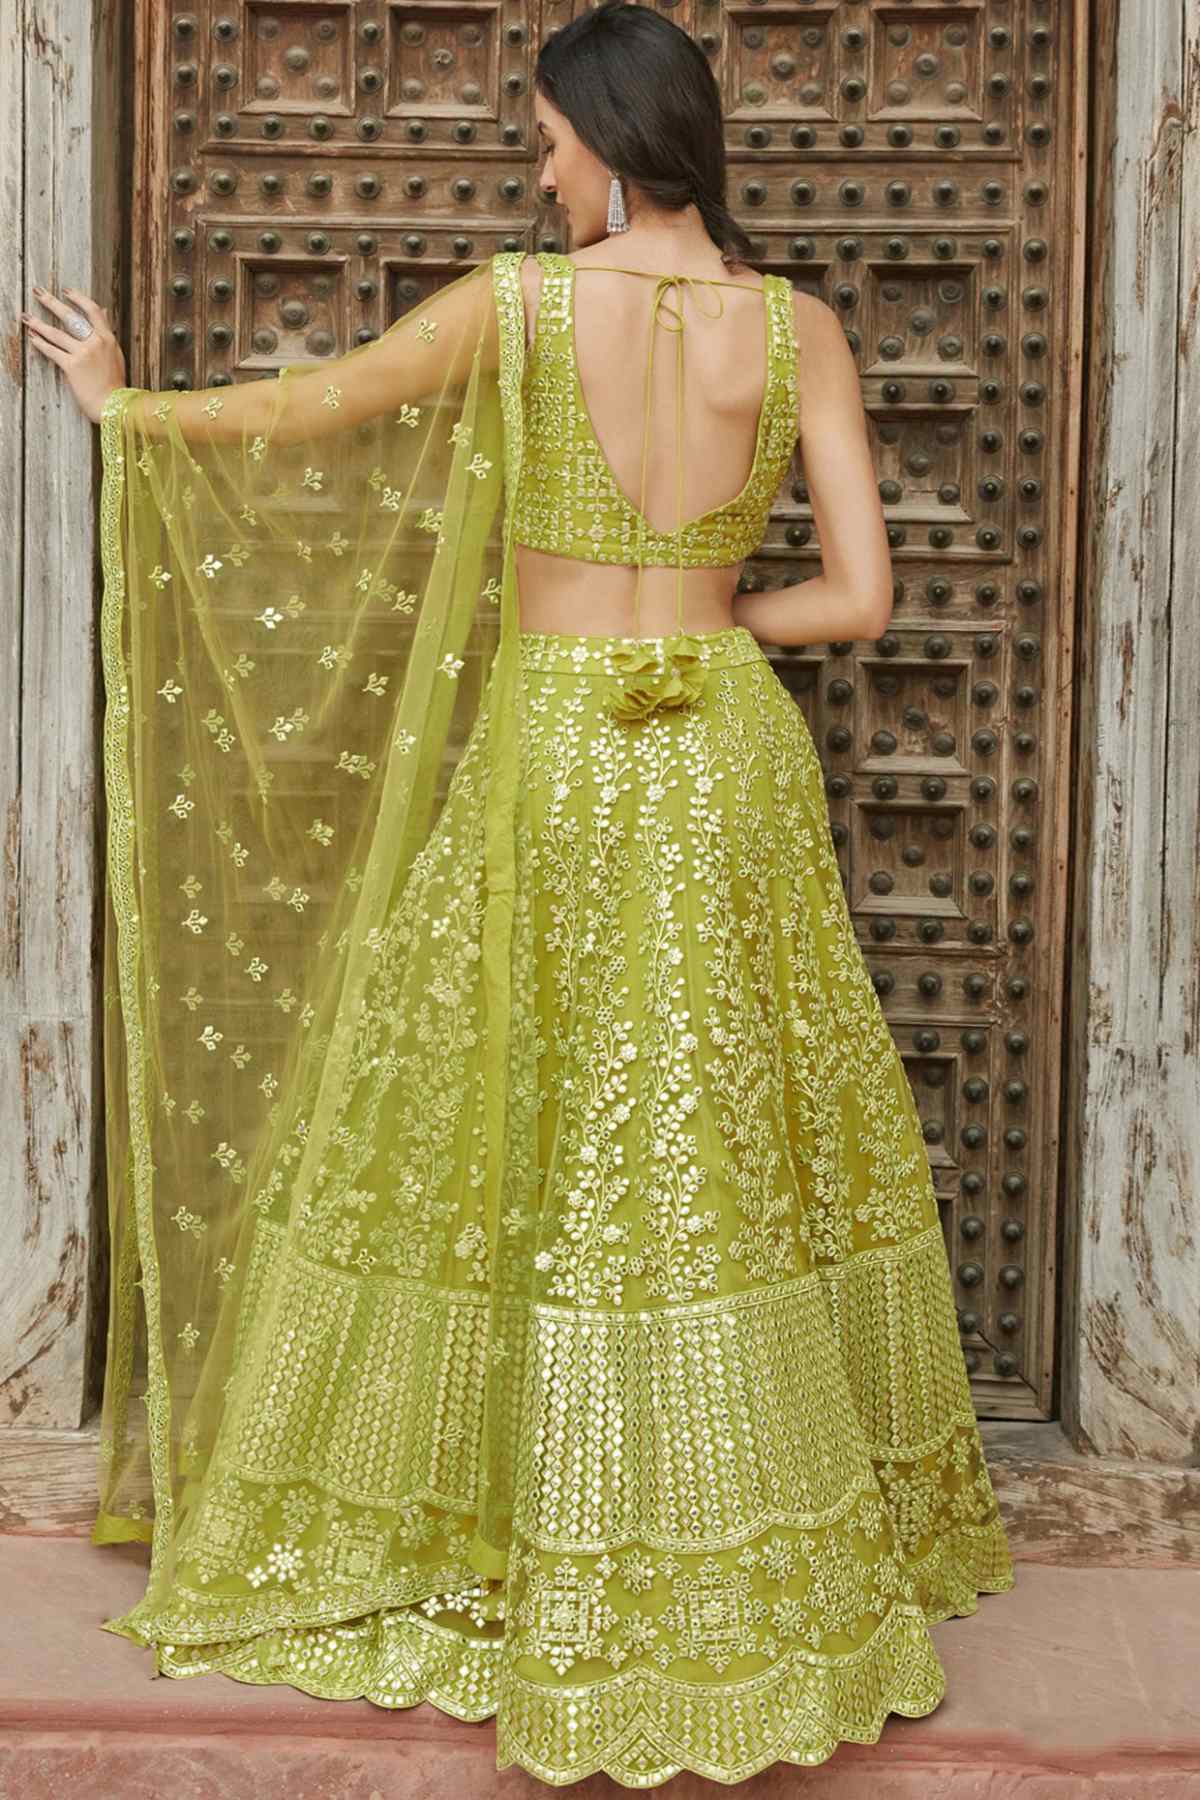 15812 ORGANZA NET SEQUENCE EMBROIDERY BUY ONLINE LATEST EXCLUSIVE GLAMOROUS  SIZZLING HOT WEDDING BRIDAL RECEPTION SPECIAL PARTY WEAR READYMADE LEHENGA  CHOLI BOLLYWOOD DRESSES ON REEWAZ INTERNATIONAL - Reewaz International |  Wholesaler &